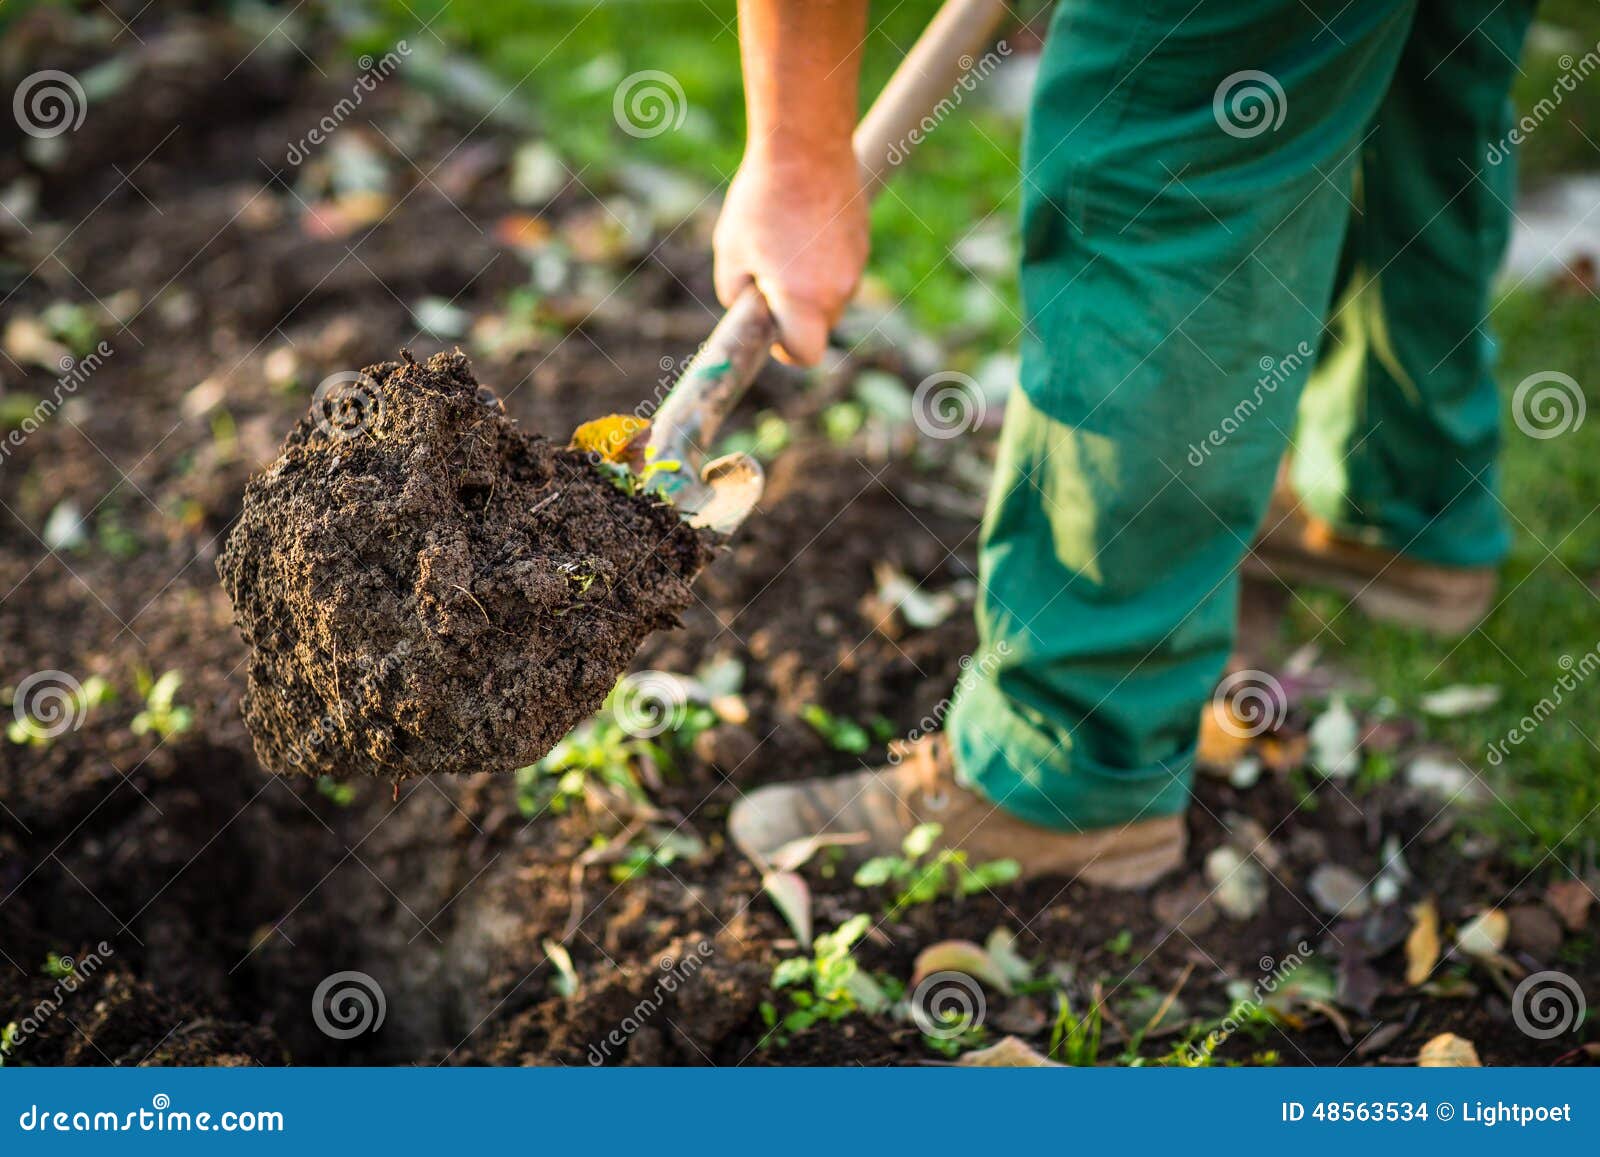 gardening - man digging the garden soil with a spud